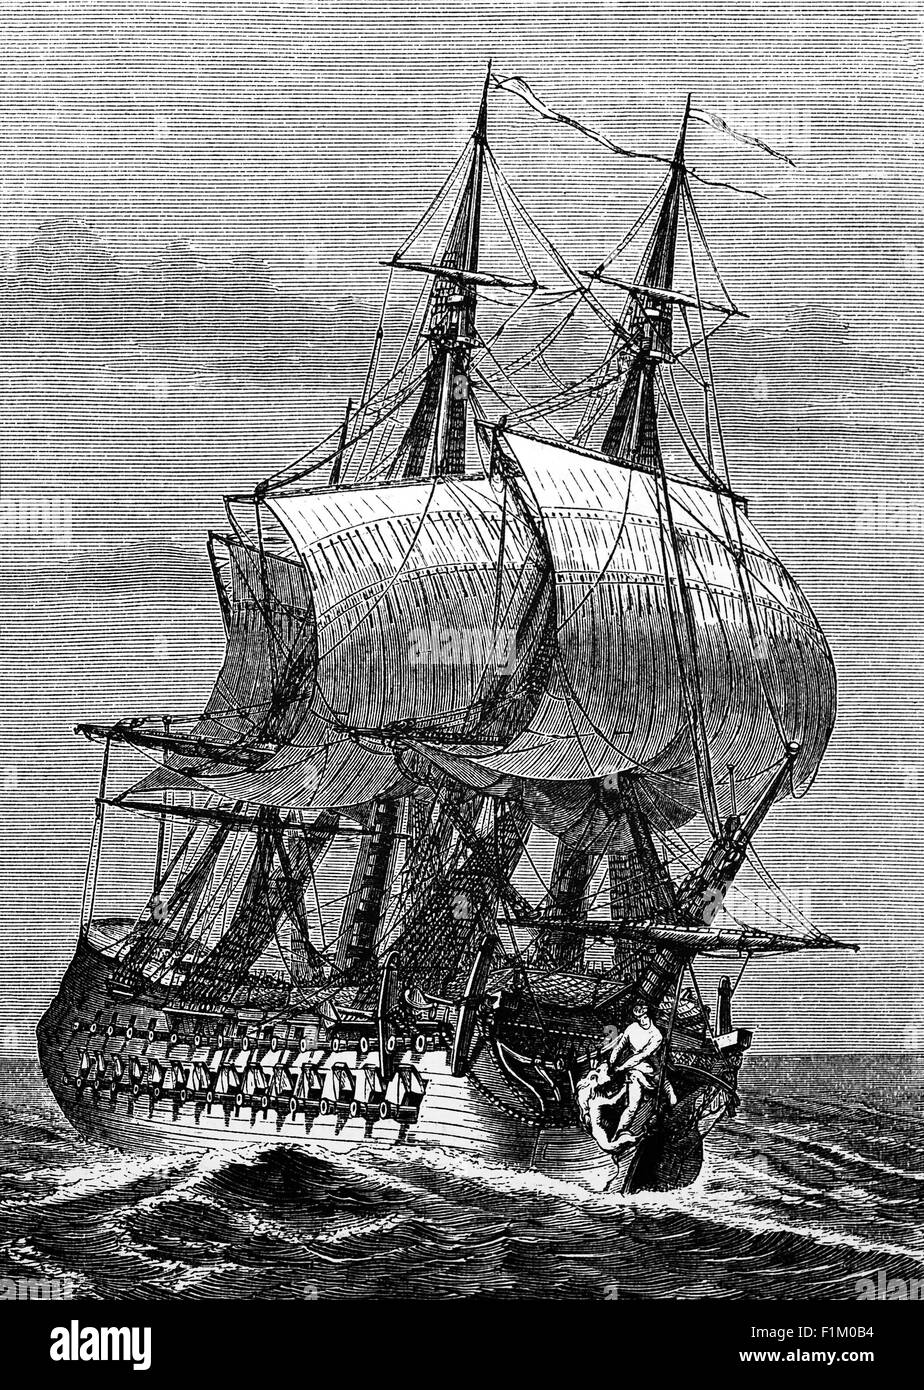 A man-of-war of indeterminate Nationality in the Atlantic Ocean. It was a Royal Navy expression for a powerful warship or frigate from the 16th to the 19th century. Although the term never acquired a specific meaning, it was usually reserved for a ship armed with cannon and propelled primarily by sails, as opposed to a galley which is propelled primarily by oars. Stock Photo